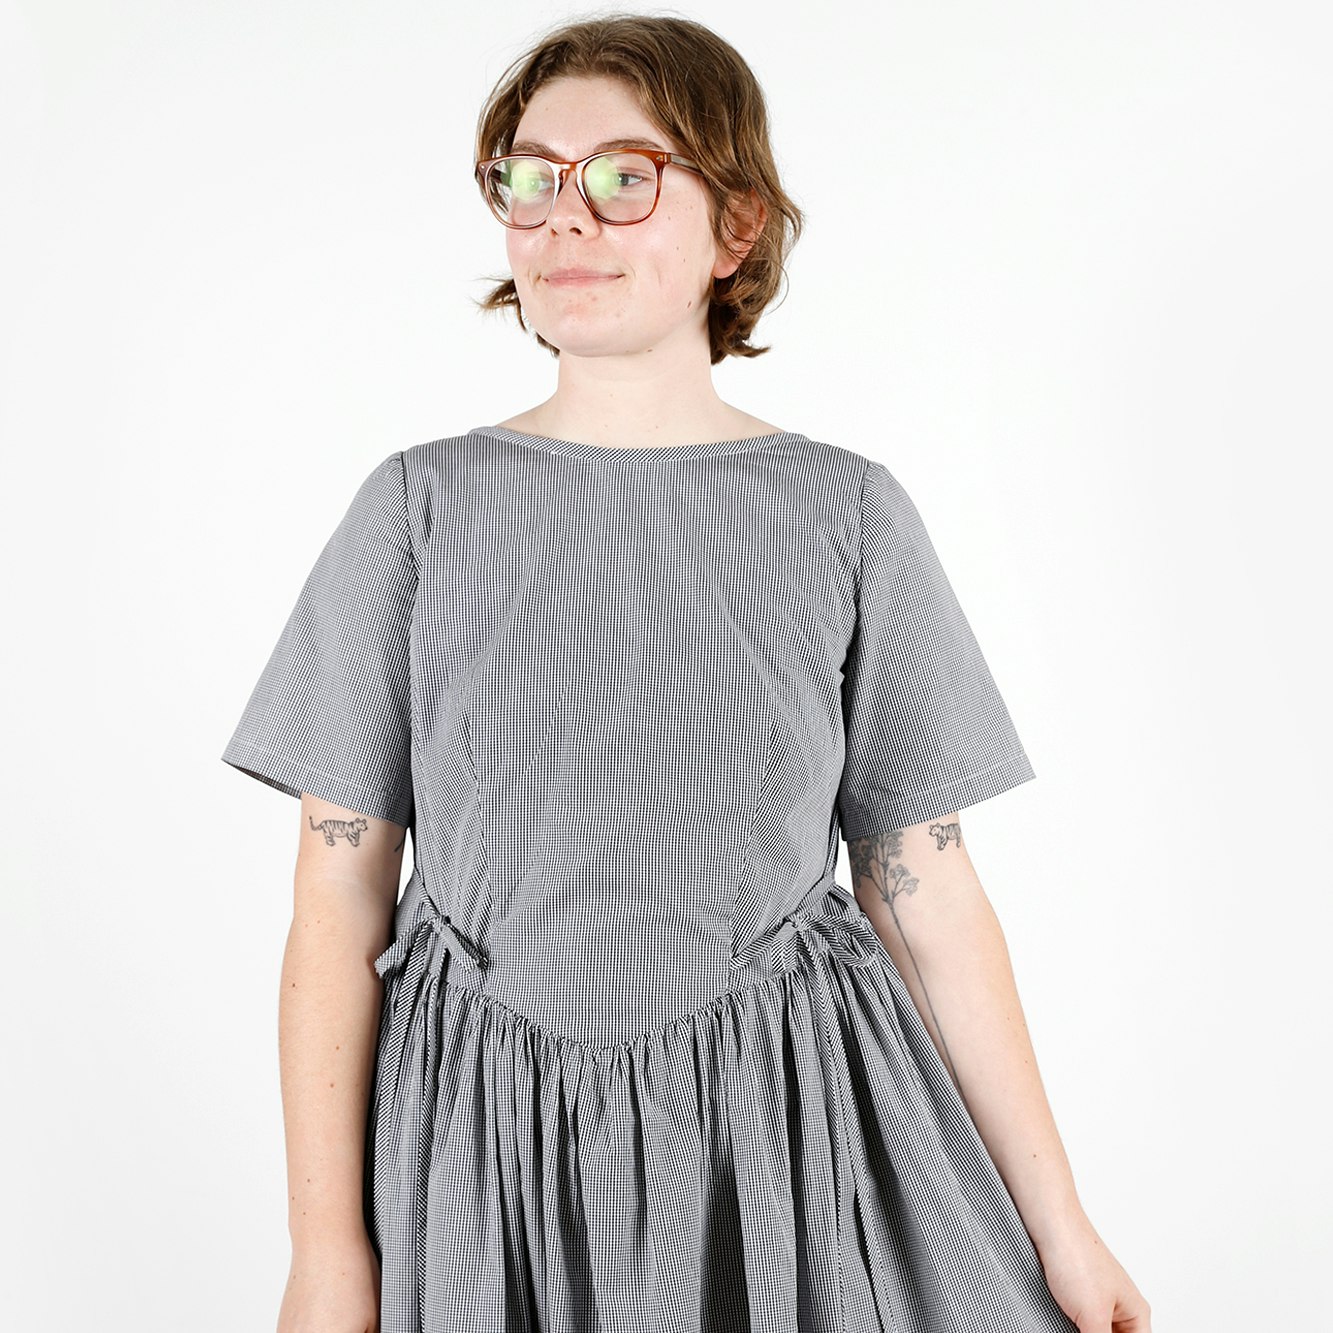 SQ Steph Willow Dress Front Smiling Crop